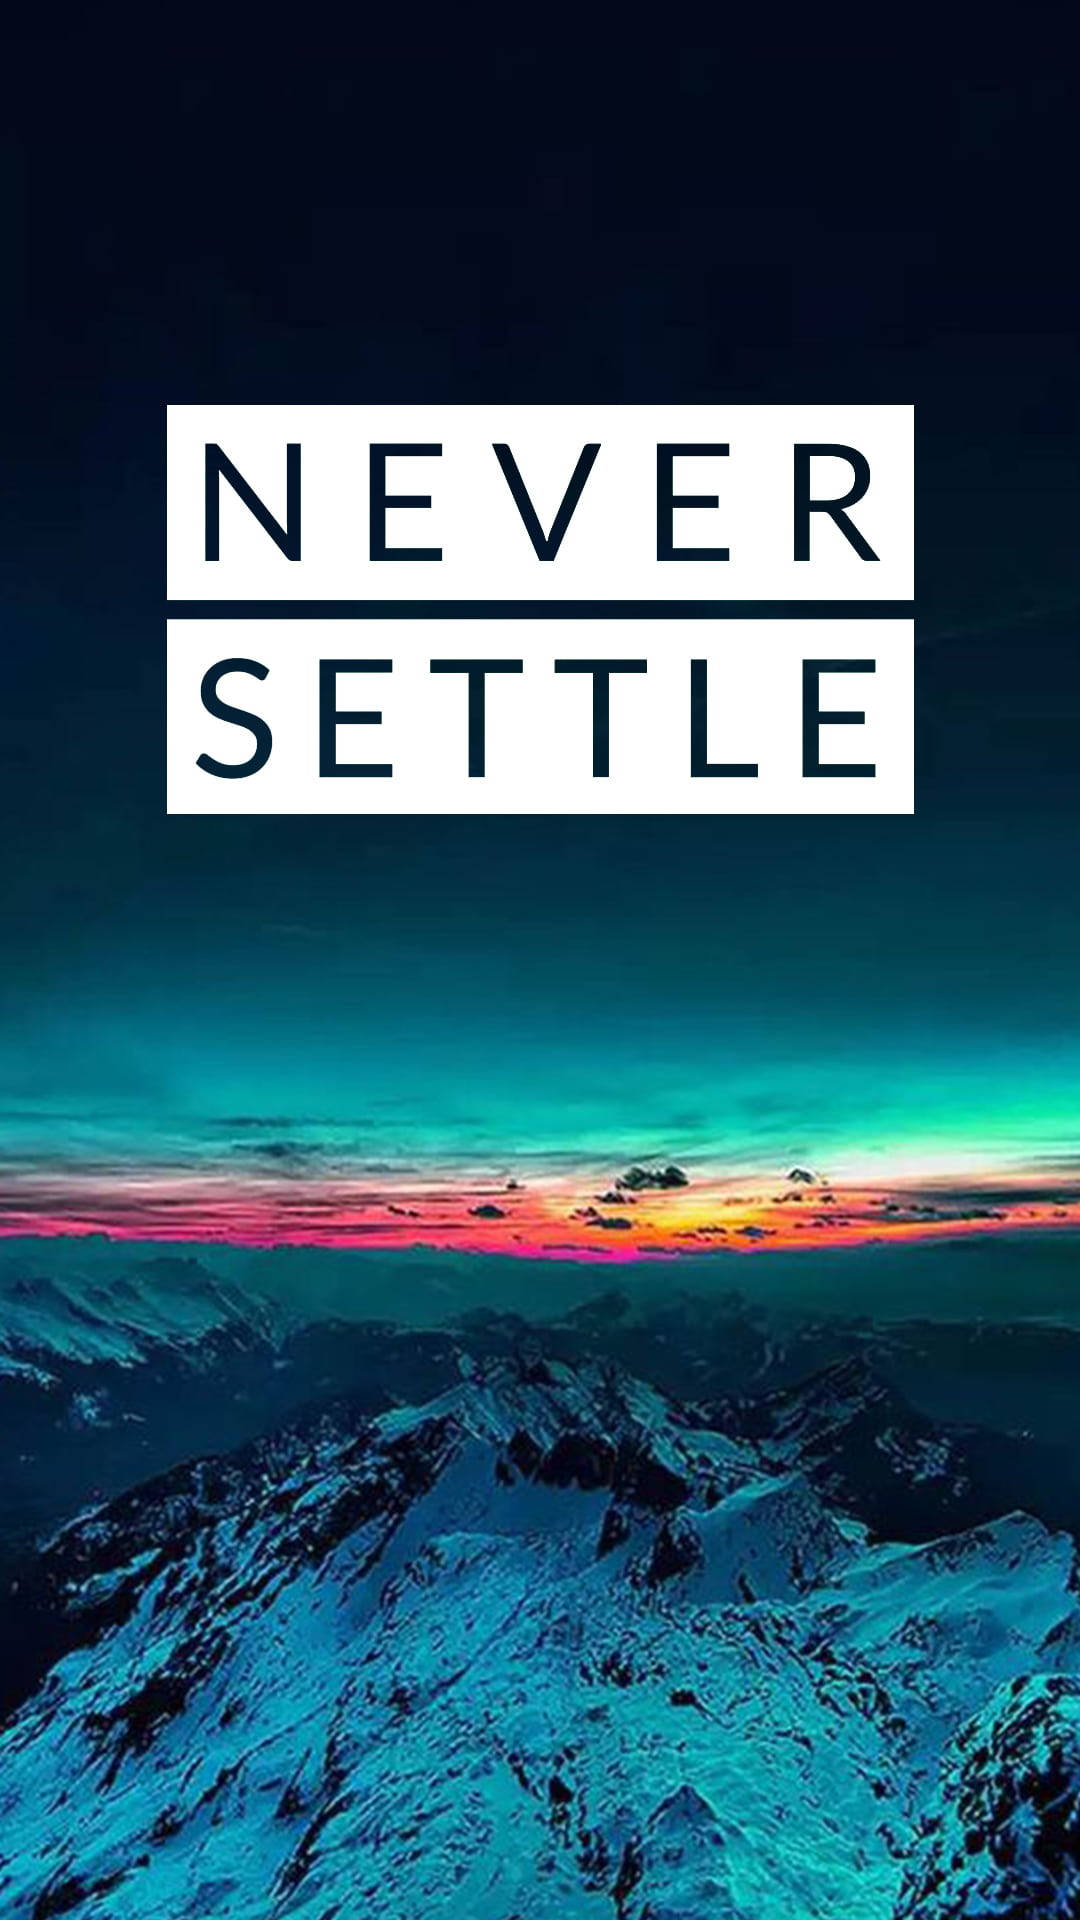 Oneplus Nord Never Setter Mountain View